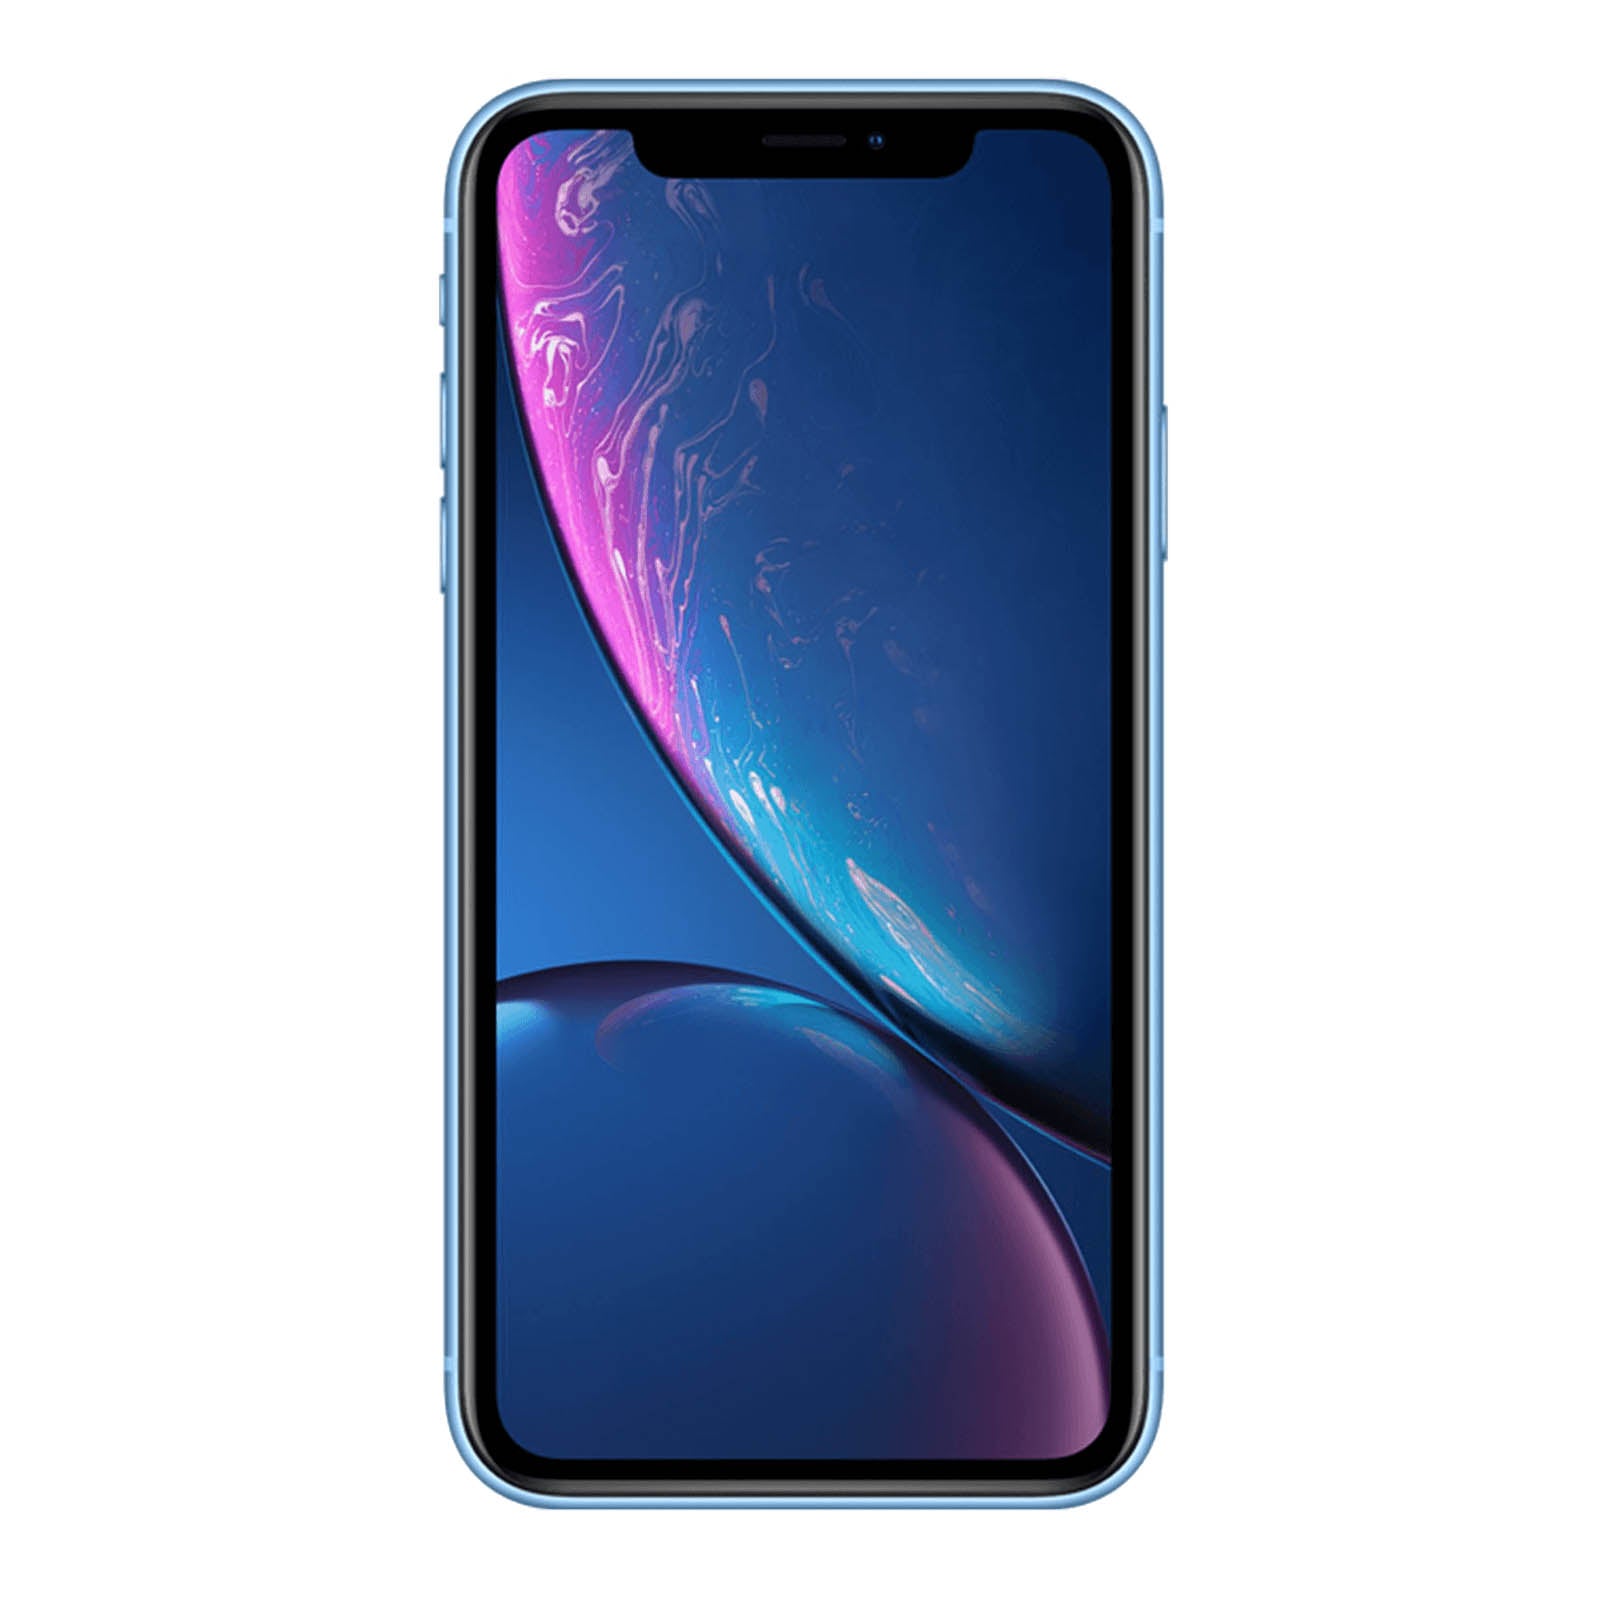 Apple iPhone XR 64GB Blue Very Good - T-Mobile